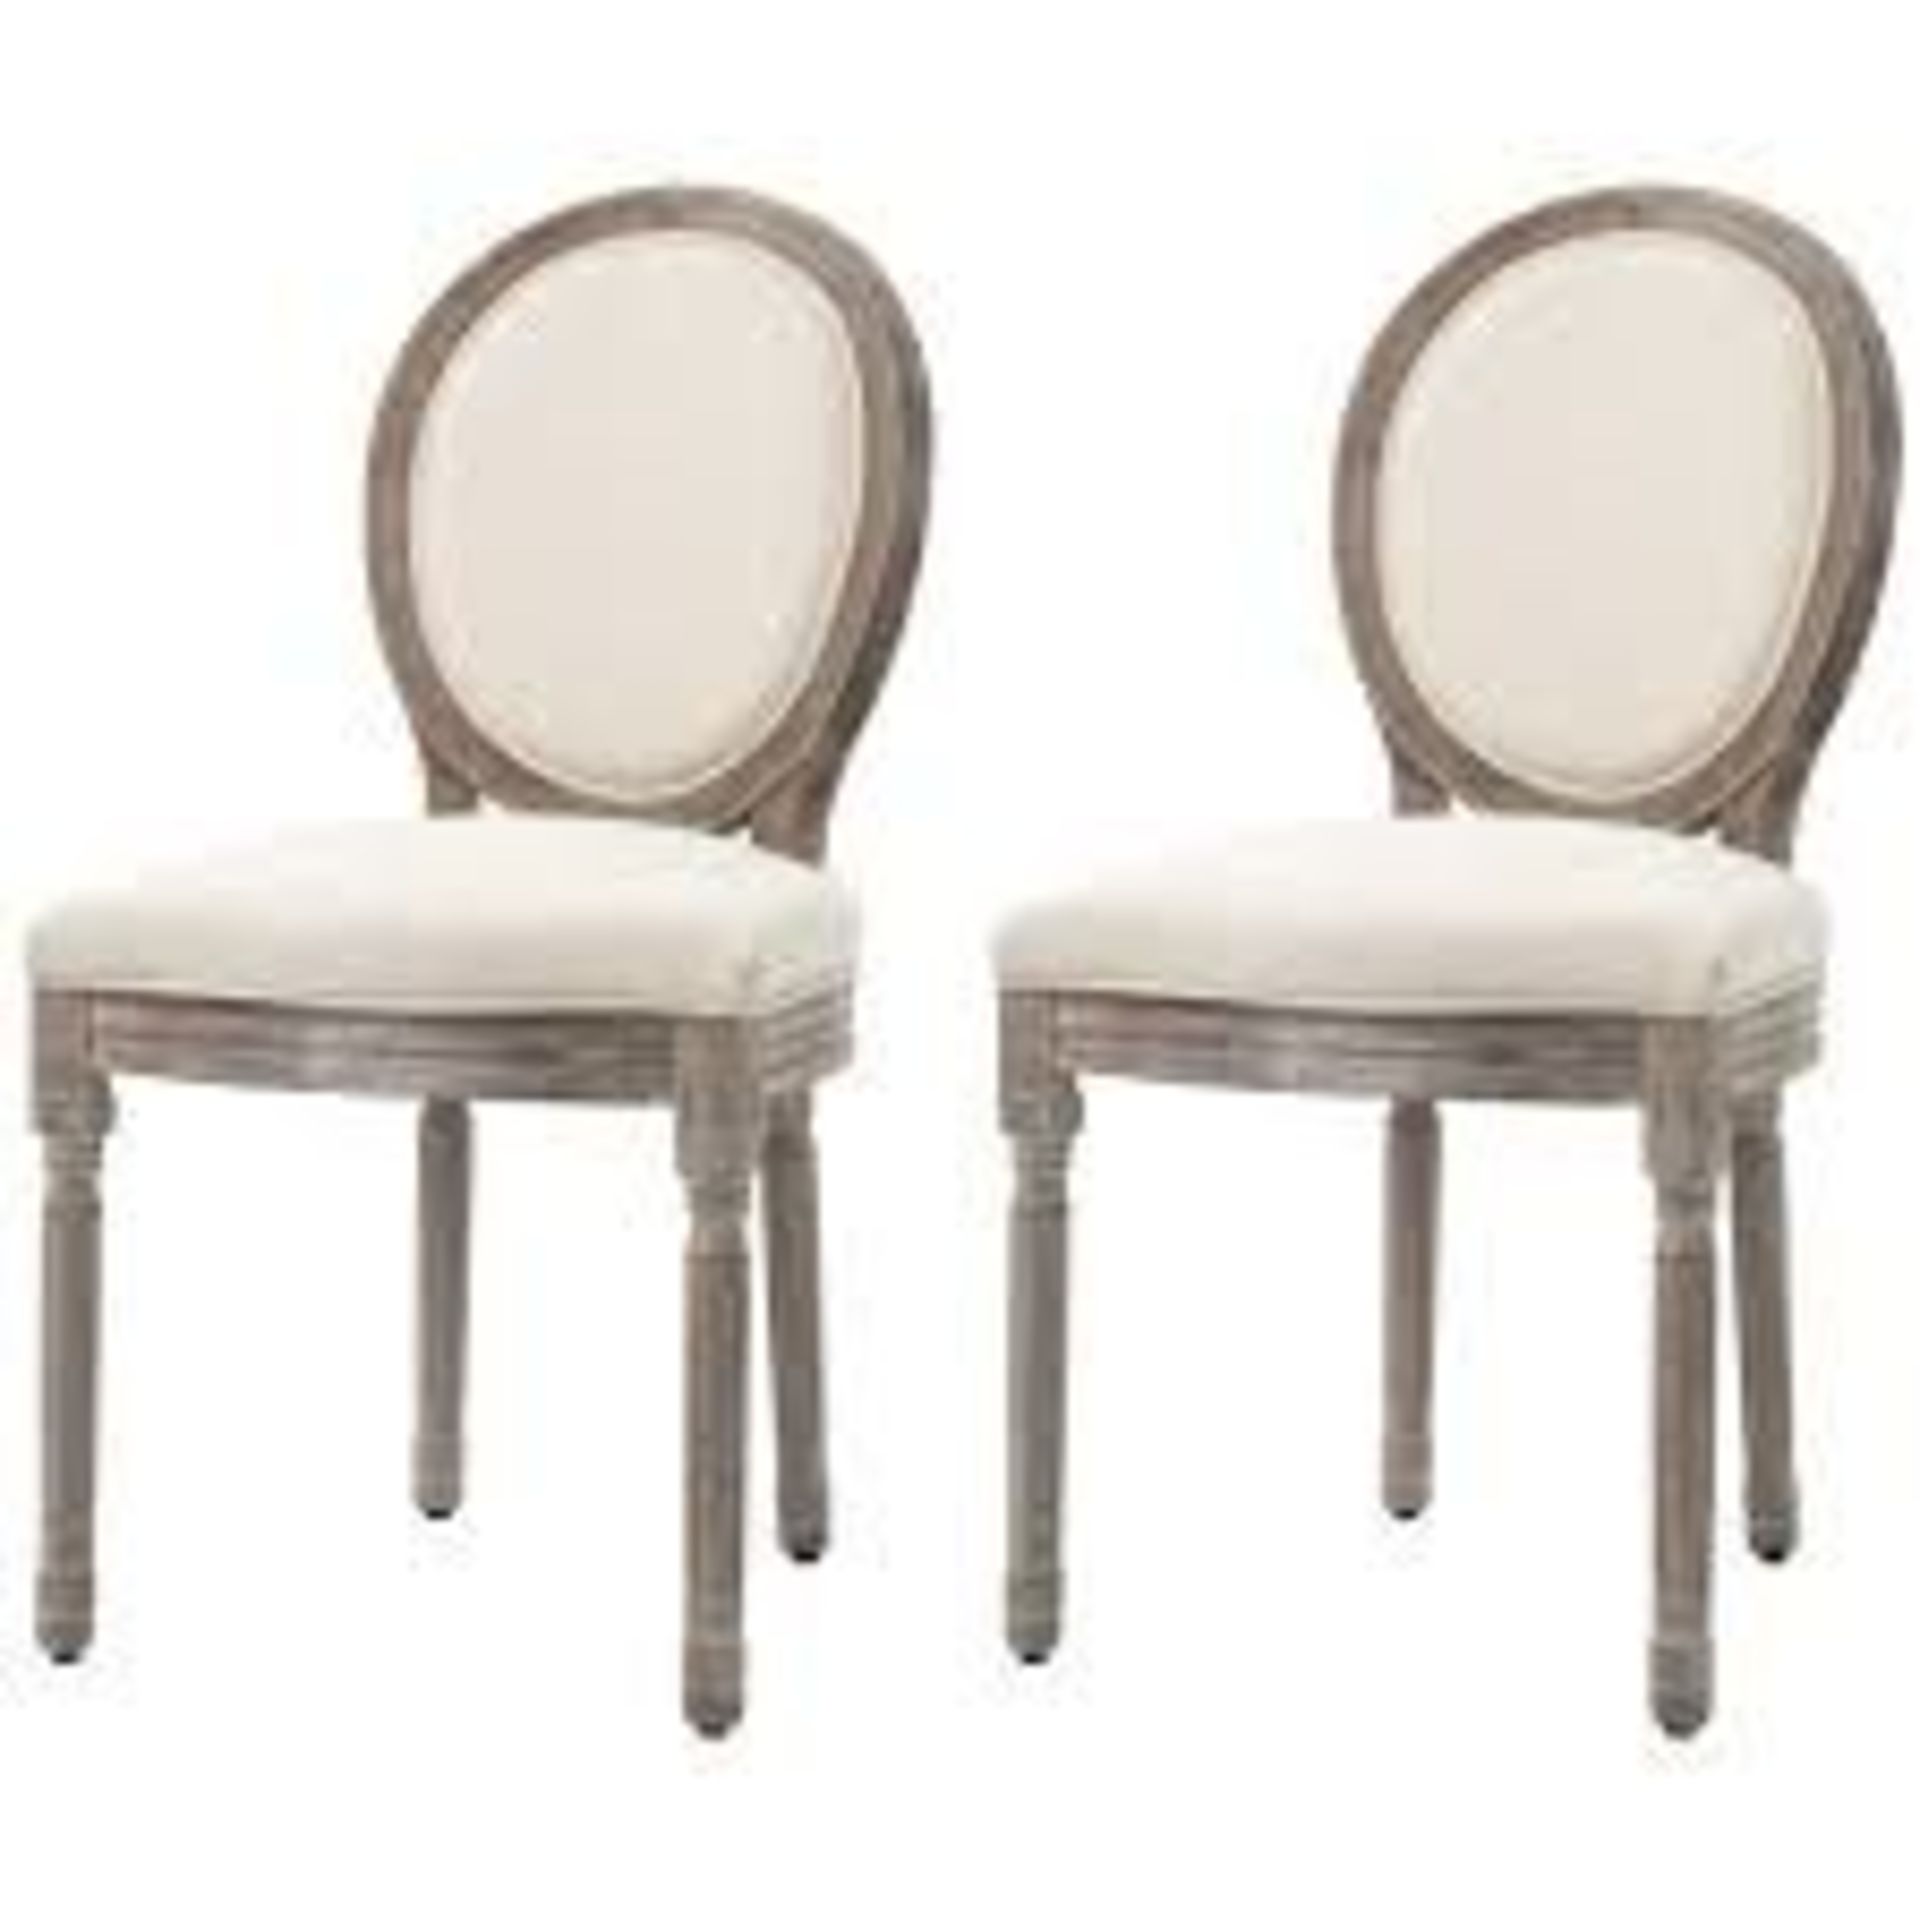 HOMCOM Dining Chairs Set of 2, French-Style Kitchen Chairs . - R13.14. RRP £229.99. - Image 2 of 2